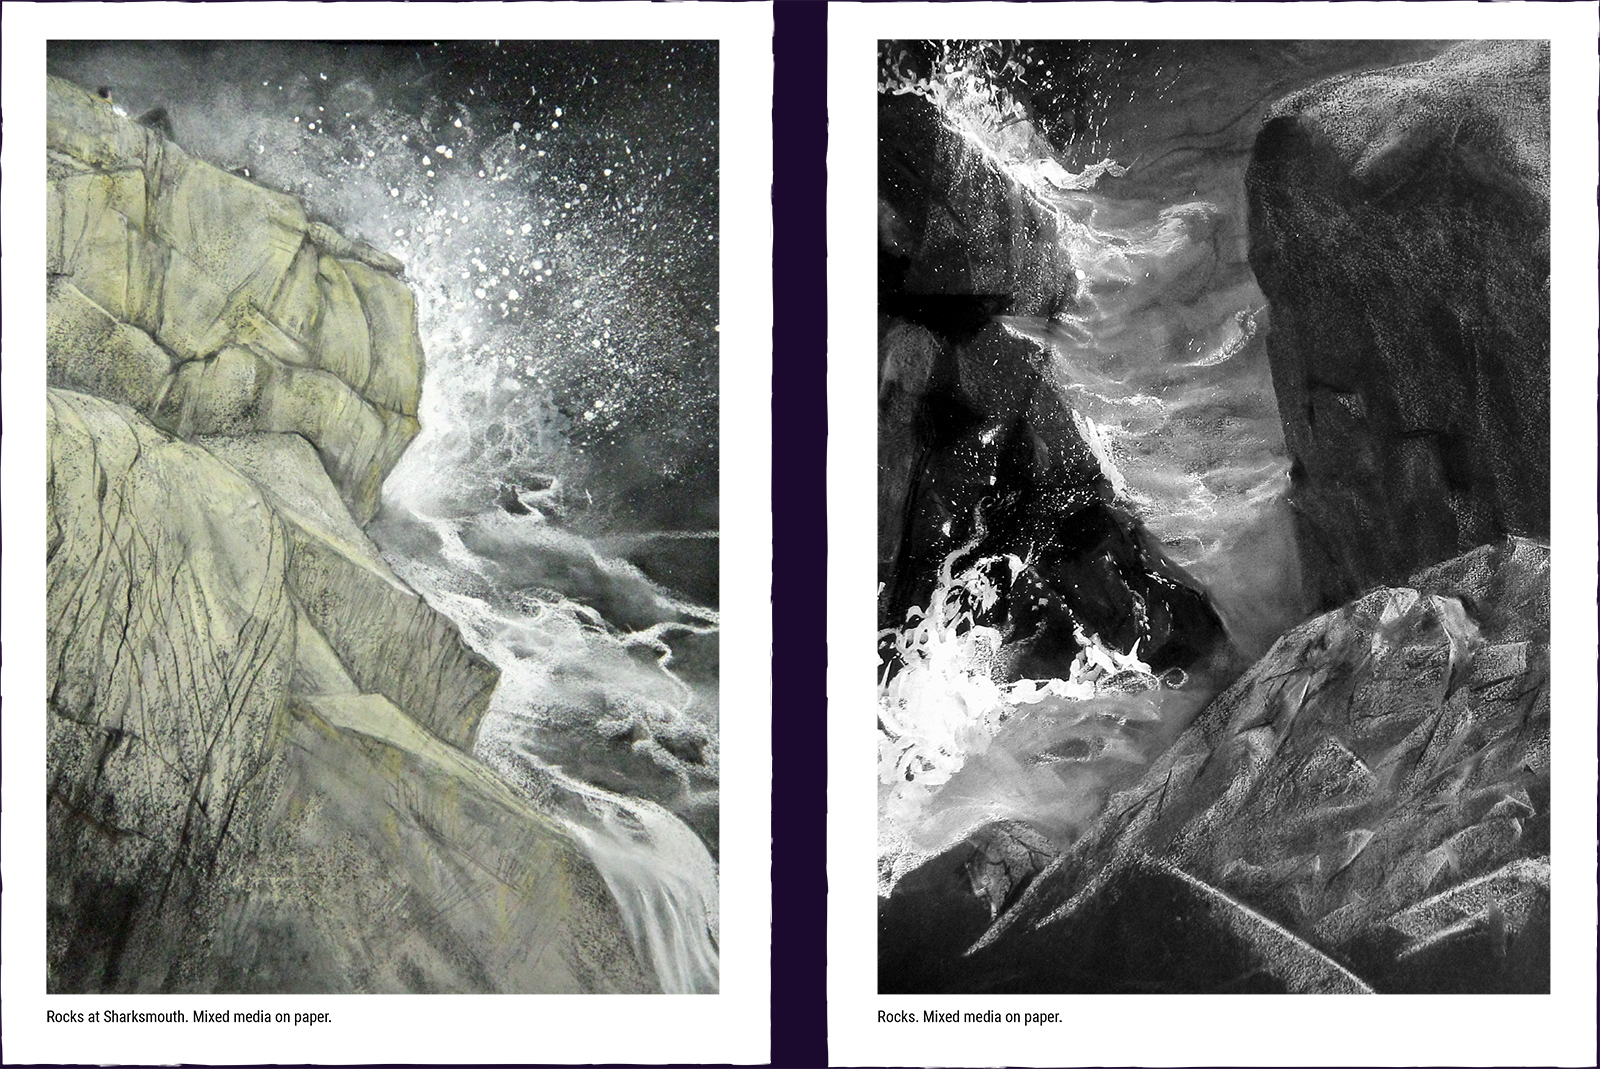 Two landscape paintings. (1) Rocks at Sharksmouth. Mixed media on paper. (2) Rocks. Mixed media on paper.